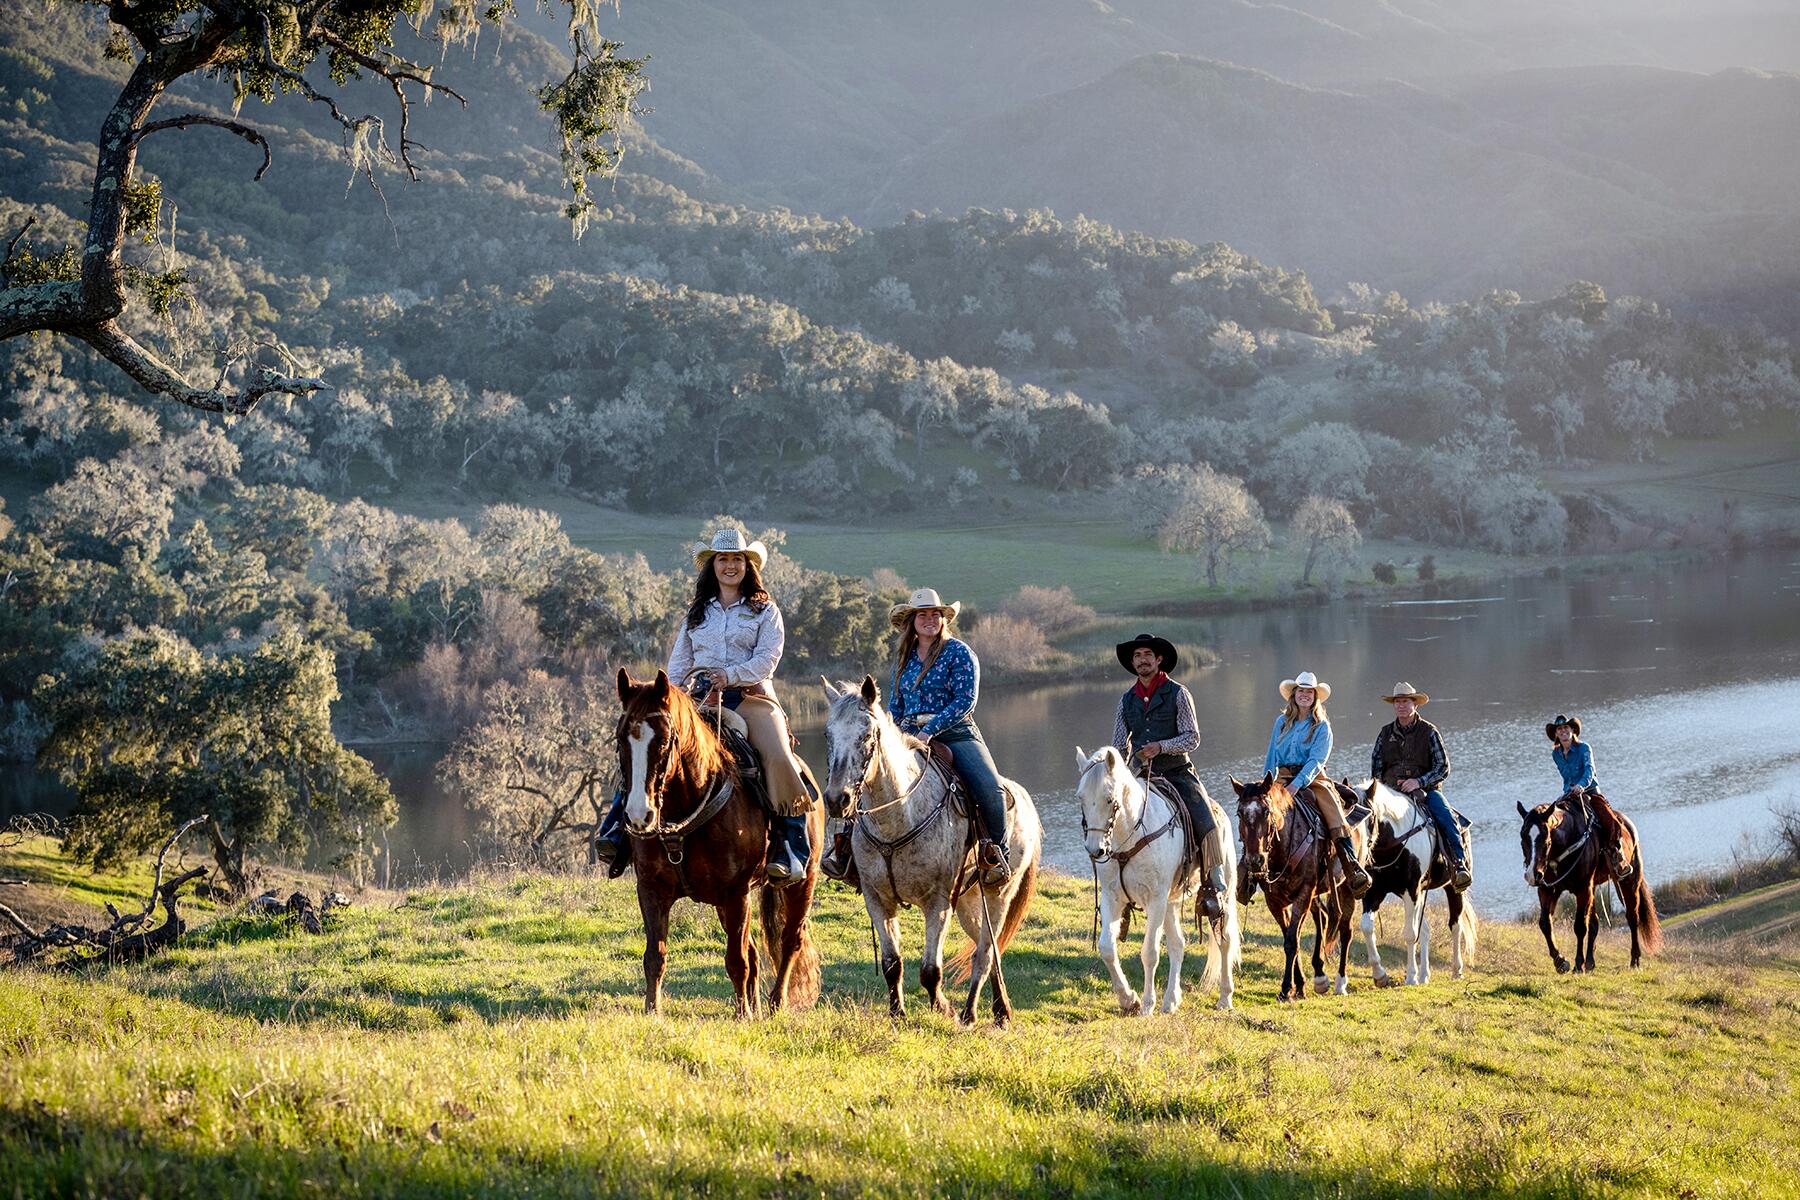 This Fearless Female Wrangler Runs The Alisal Ranch, One of California's  Most Historic Dude Ranches